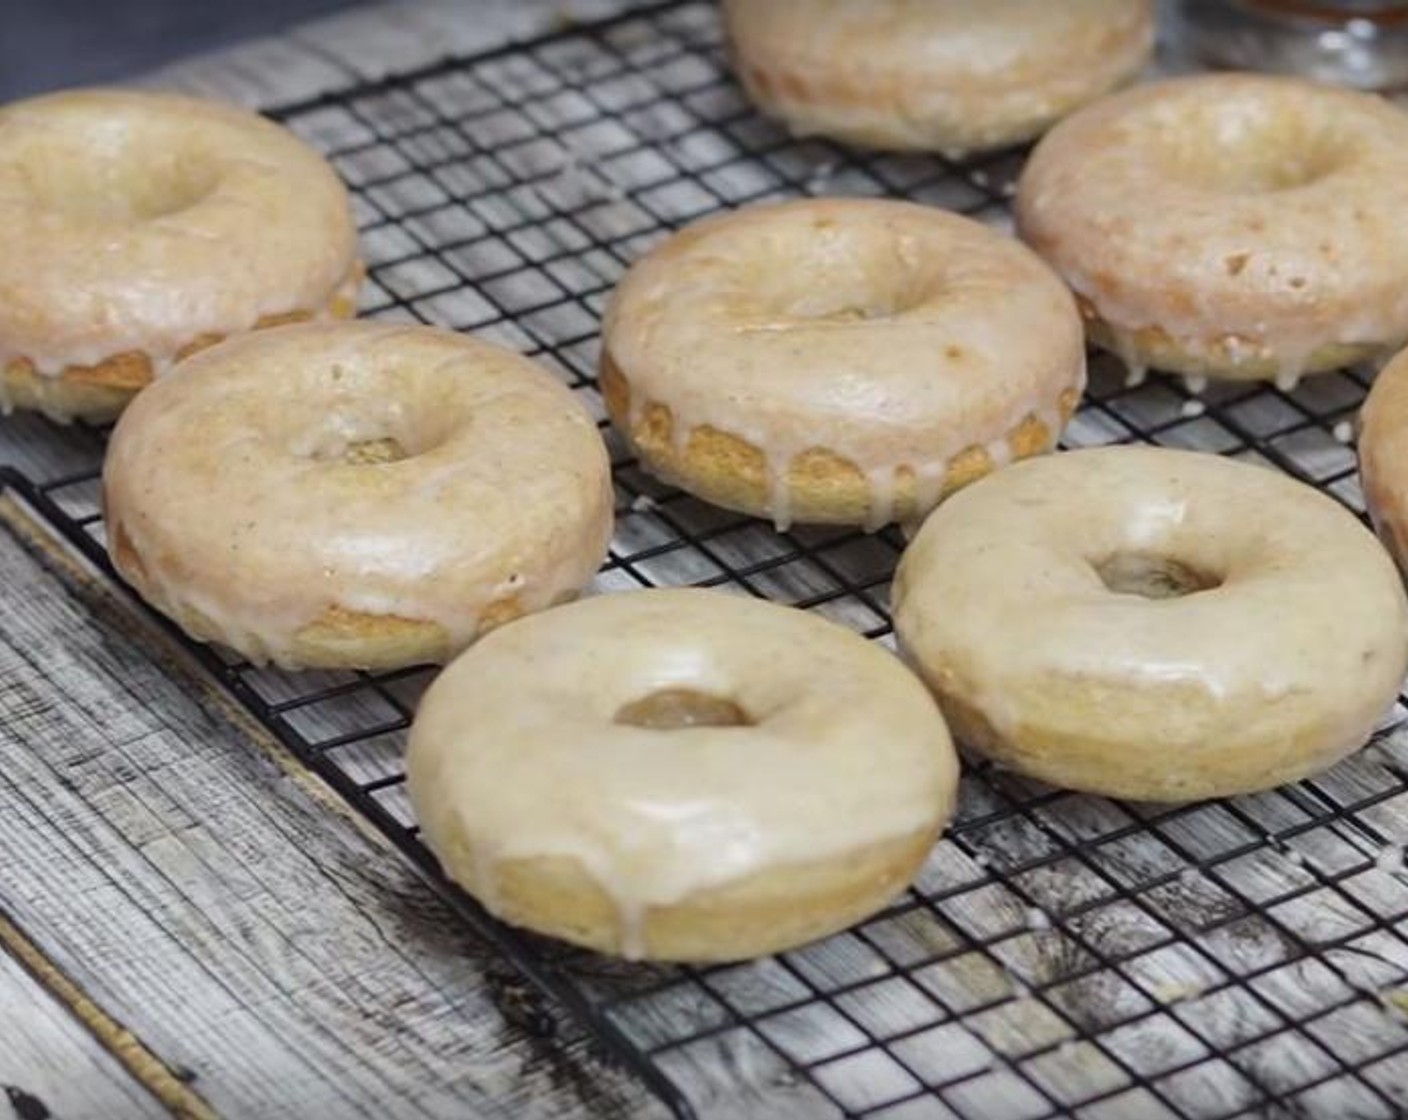 step 3 Allow donuts to cool completely. In the meantime, make the donuts glaze; in a bowl mix Powdered Confectioners Sugar (2 cups) Pumpkin Pie Spice (1/2 tsp) and Apple Cider (1/4 cup). Once donuts are cooled, dip the bottom in the glaze. The glaze hardens as it sets.